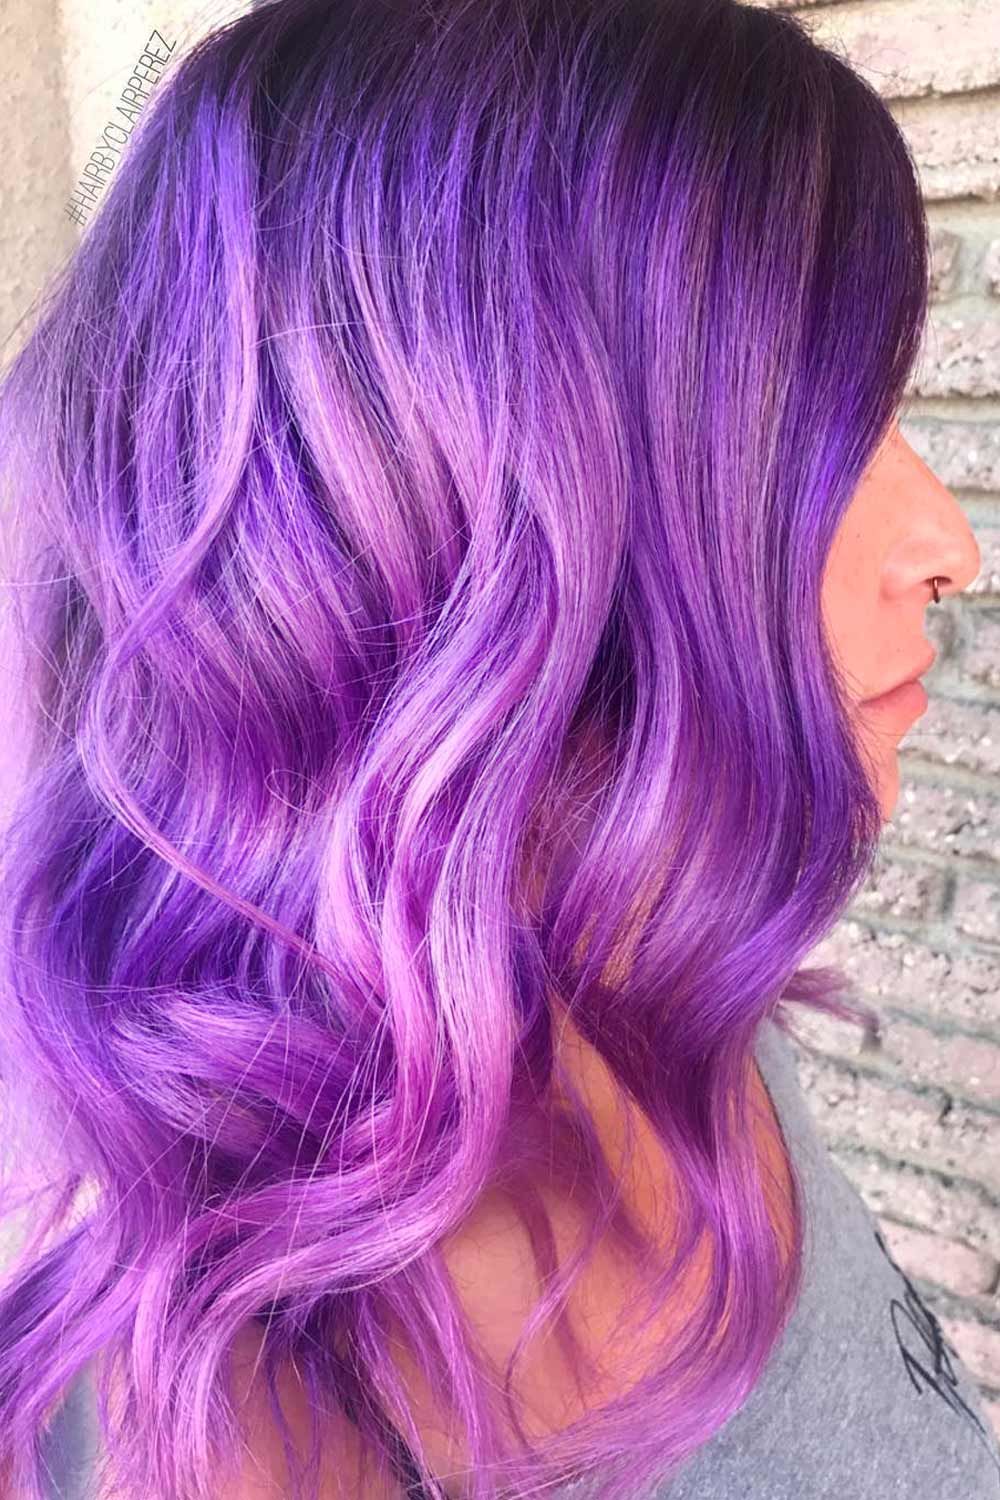 Ultra™ Violet - Amplified™ | Semi Permanent Hair Color - Tish & Snooky's  Manic Panic